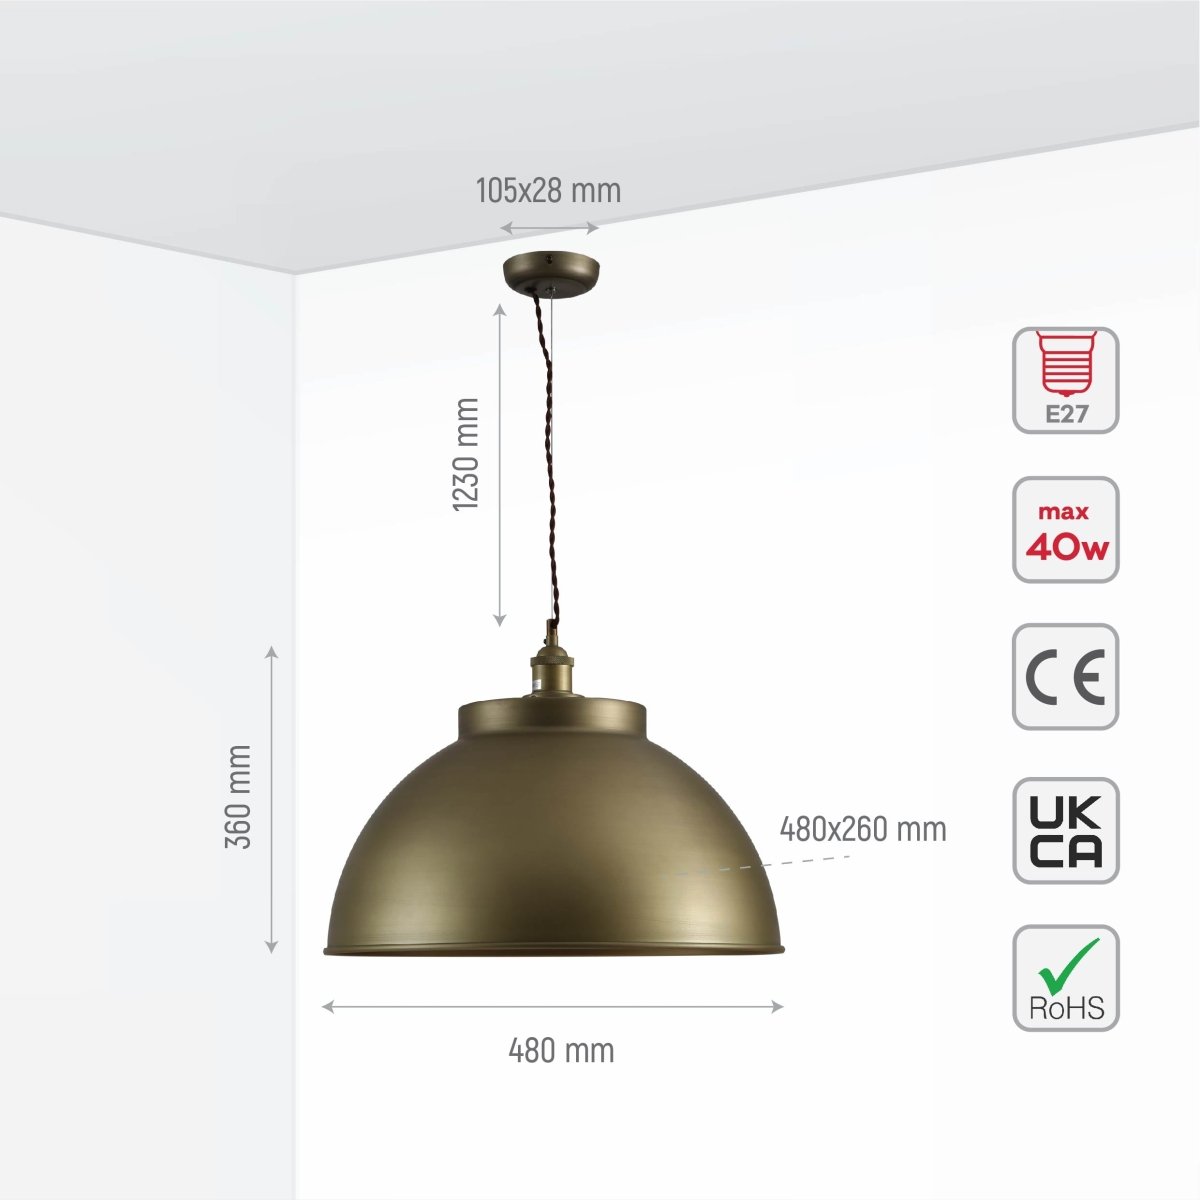 Size and specs of Brooklyn Vintage Metal Dome Pendant Light Pewter Copper  Bronze E27  | TEKLED 150-18211